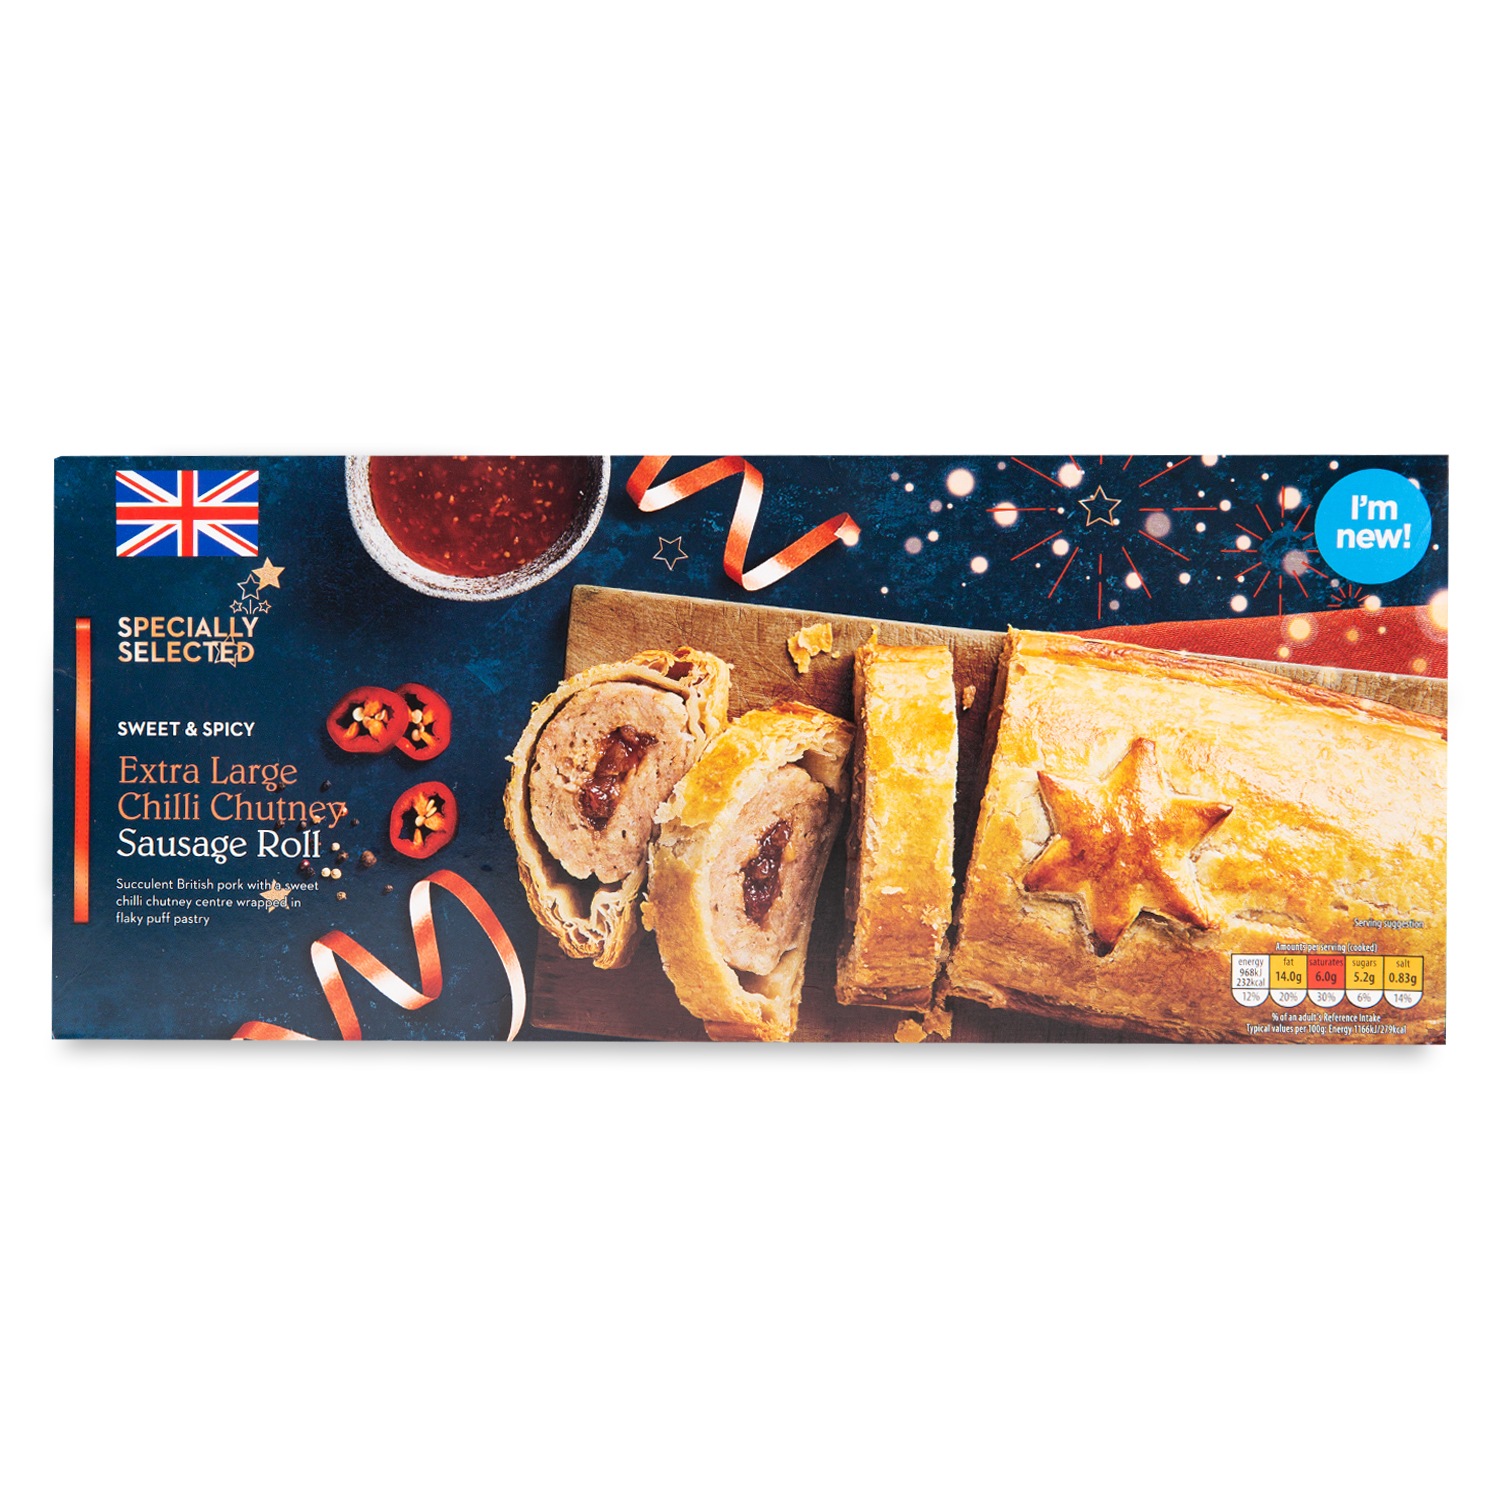 BEAT THE GREGGS' PRICE RISE: ALDI LAUNCHES SUPERSIZED BRITISH CLASSIC JUST  IN TIME FOR CHRISTMAS – FOUR TIMES BIGGER AND 24% CHEAPER THAN GREGGS' SAUSAGE  ROLL - ALDI UK Press Office